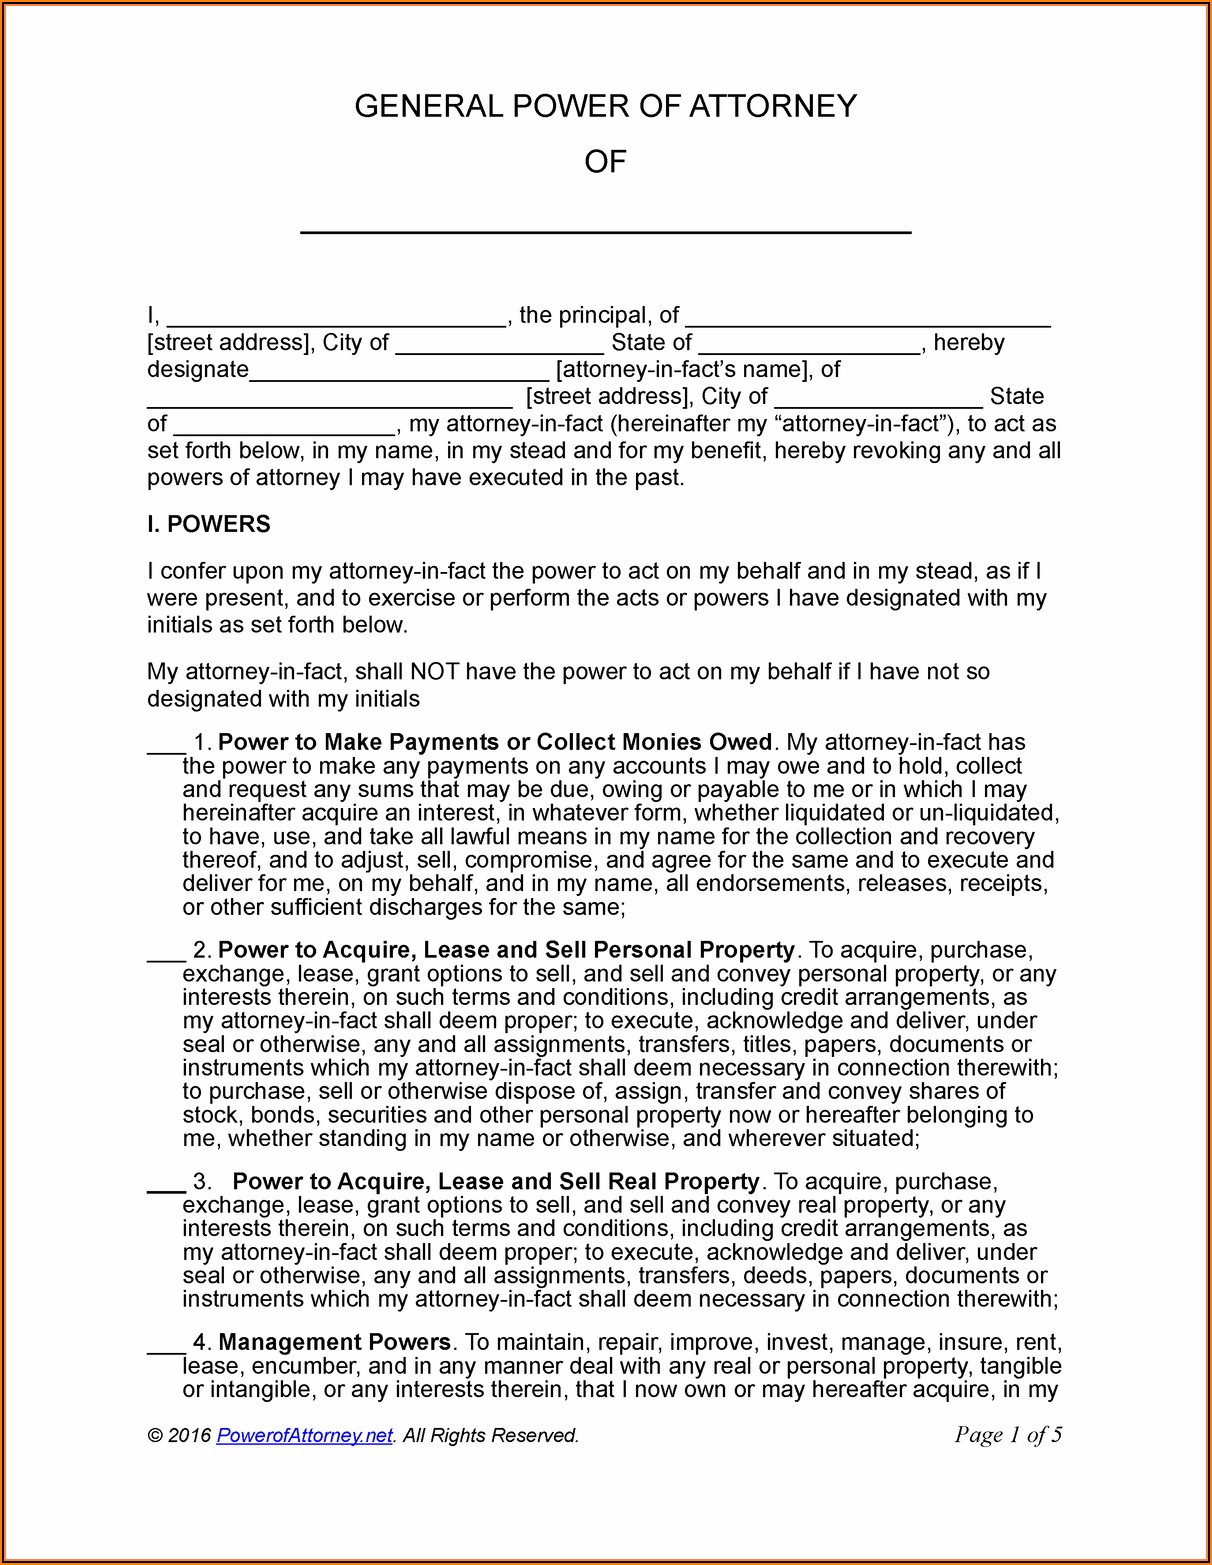 Sample Format Of Power Of Attorney